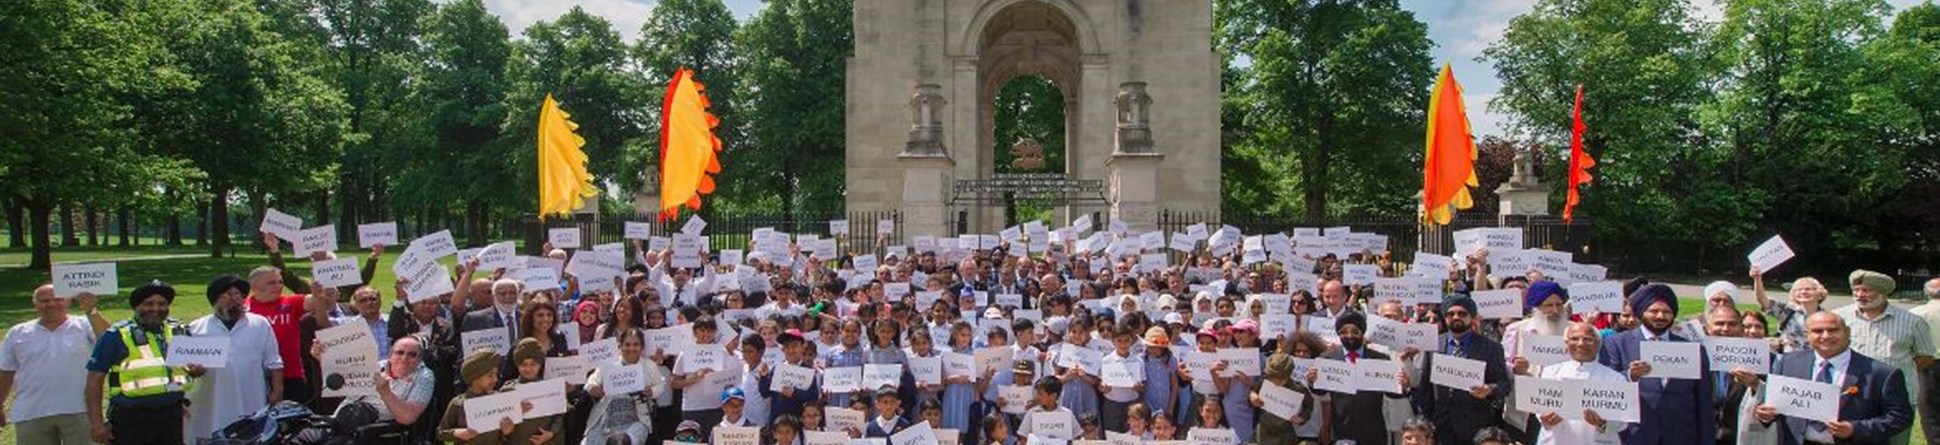 School children in Leicester attending a remembrance event for the Indian Labour Corp at Lutyen's Memorials at Leicester's Victoria Park and New Delhi's India Gate.